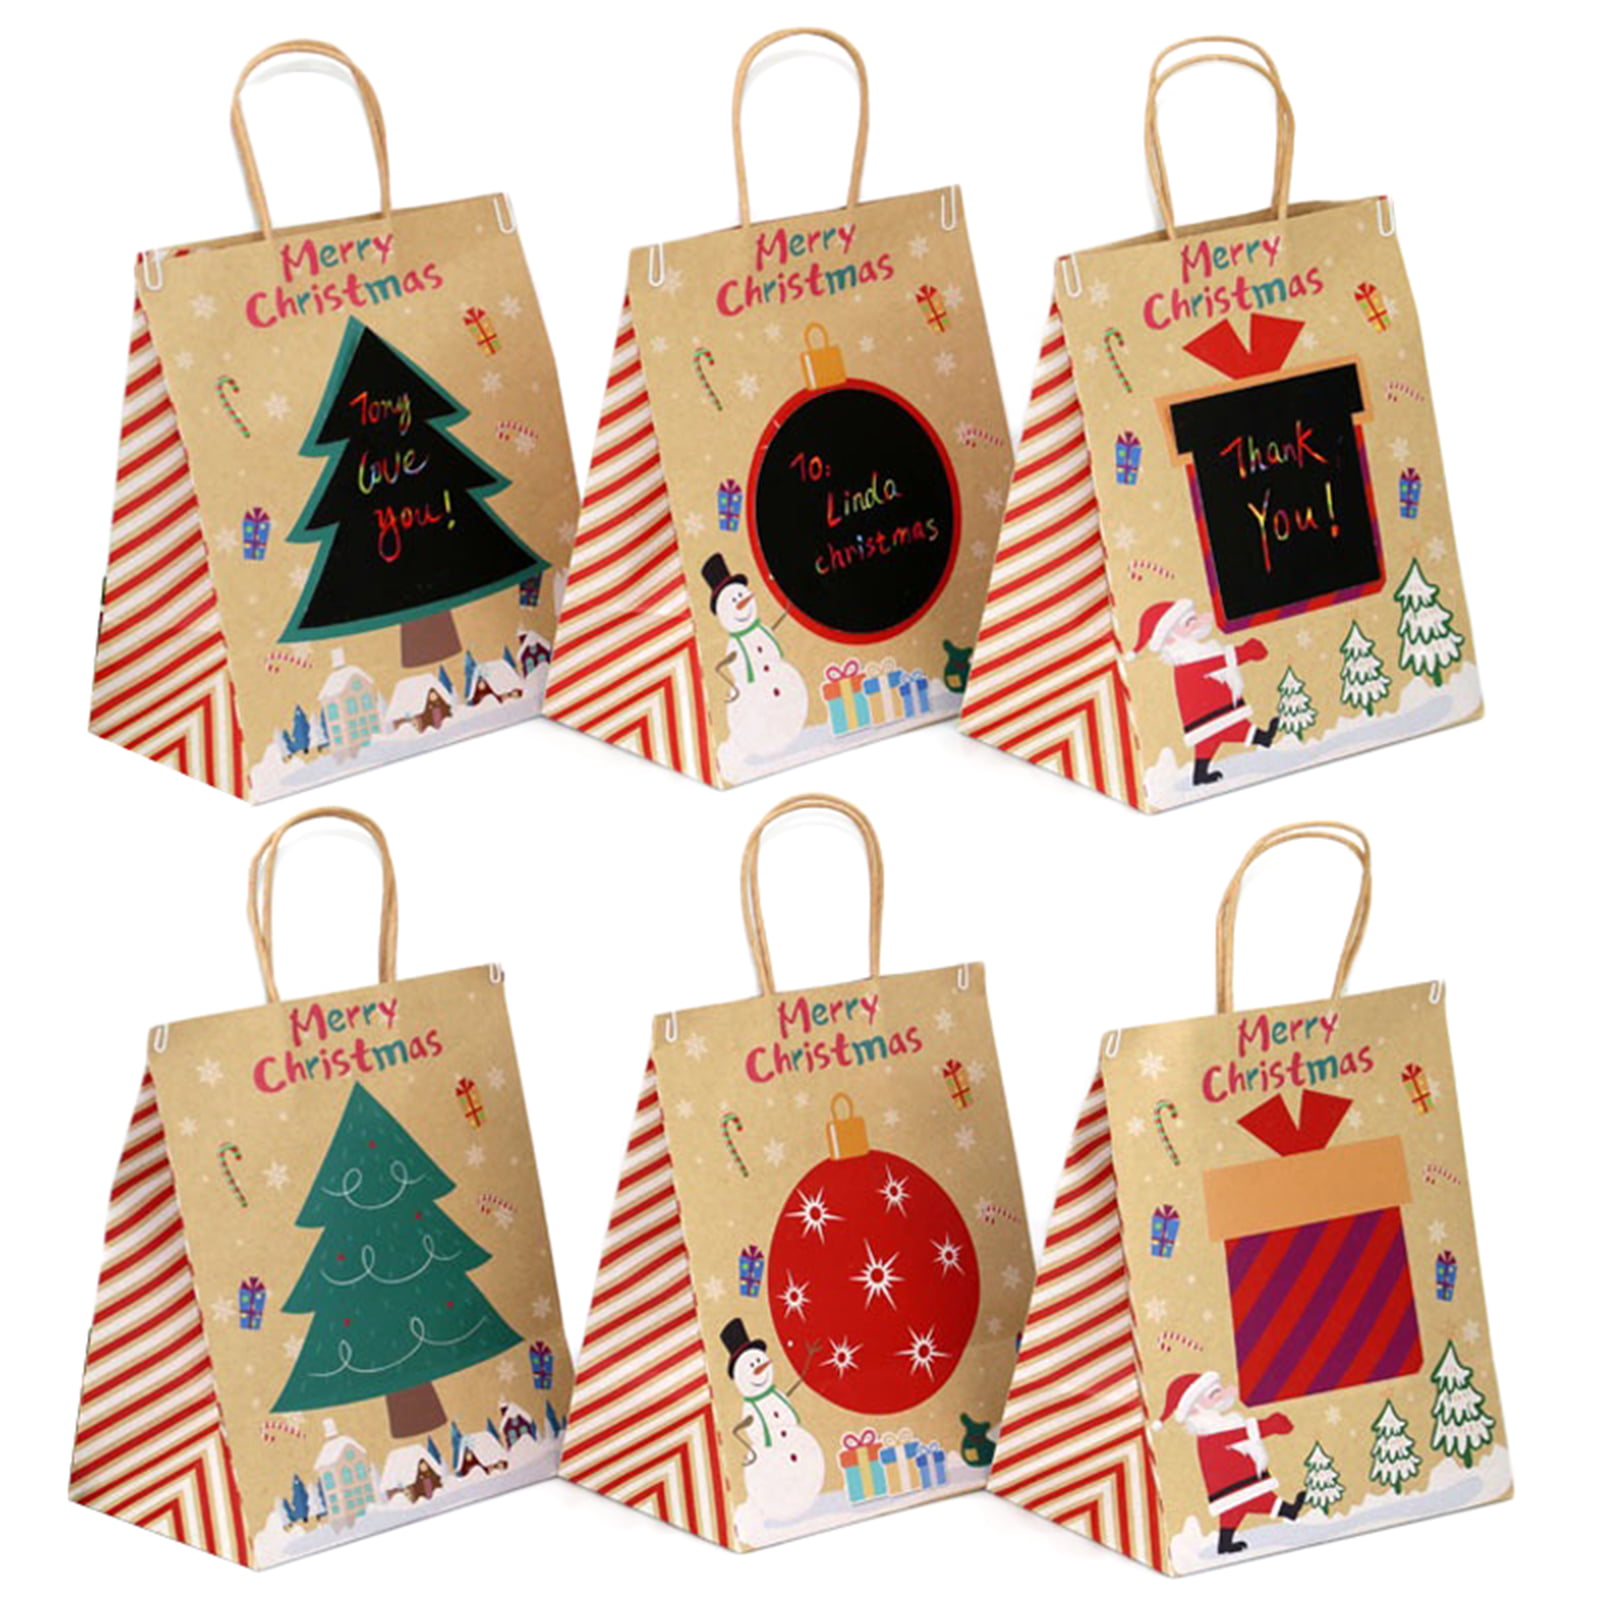 12Pcs 3 Size Paper Bag Xmas Party Birthday Wedding Present Gift Bag Carrier Box 